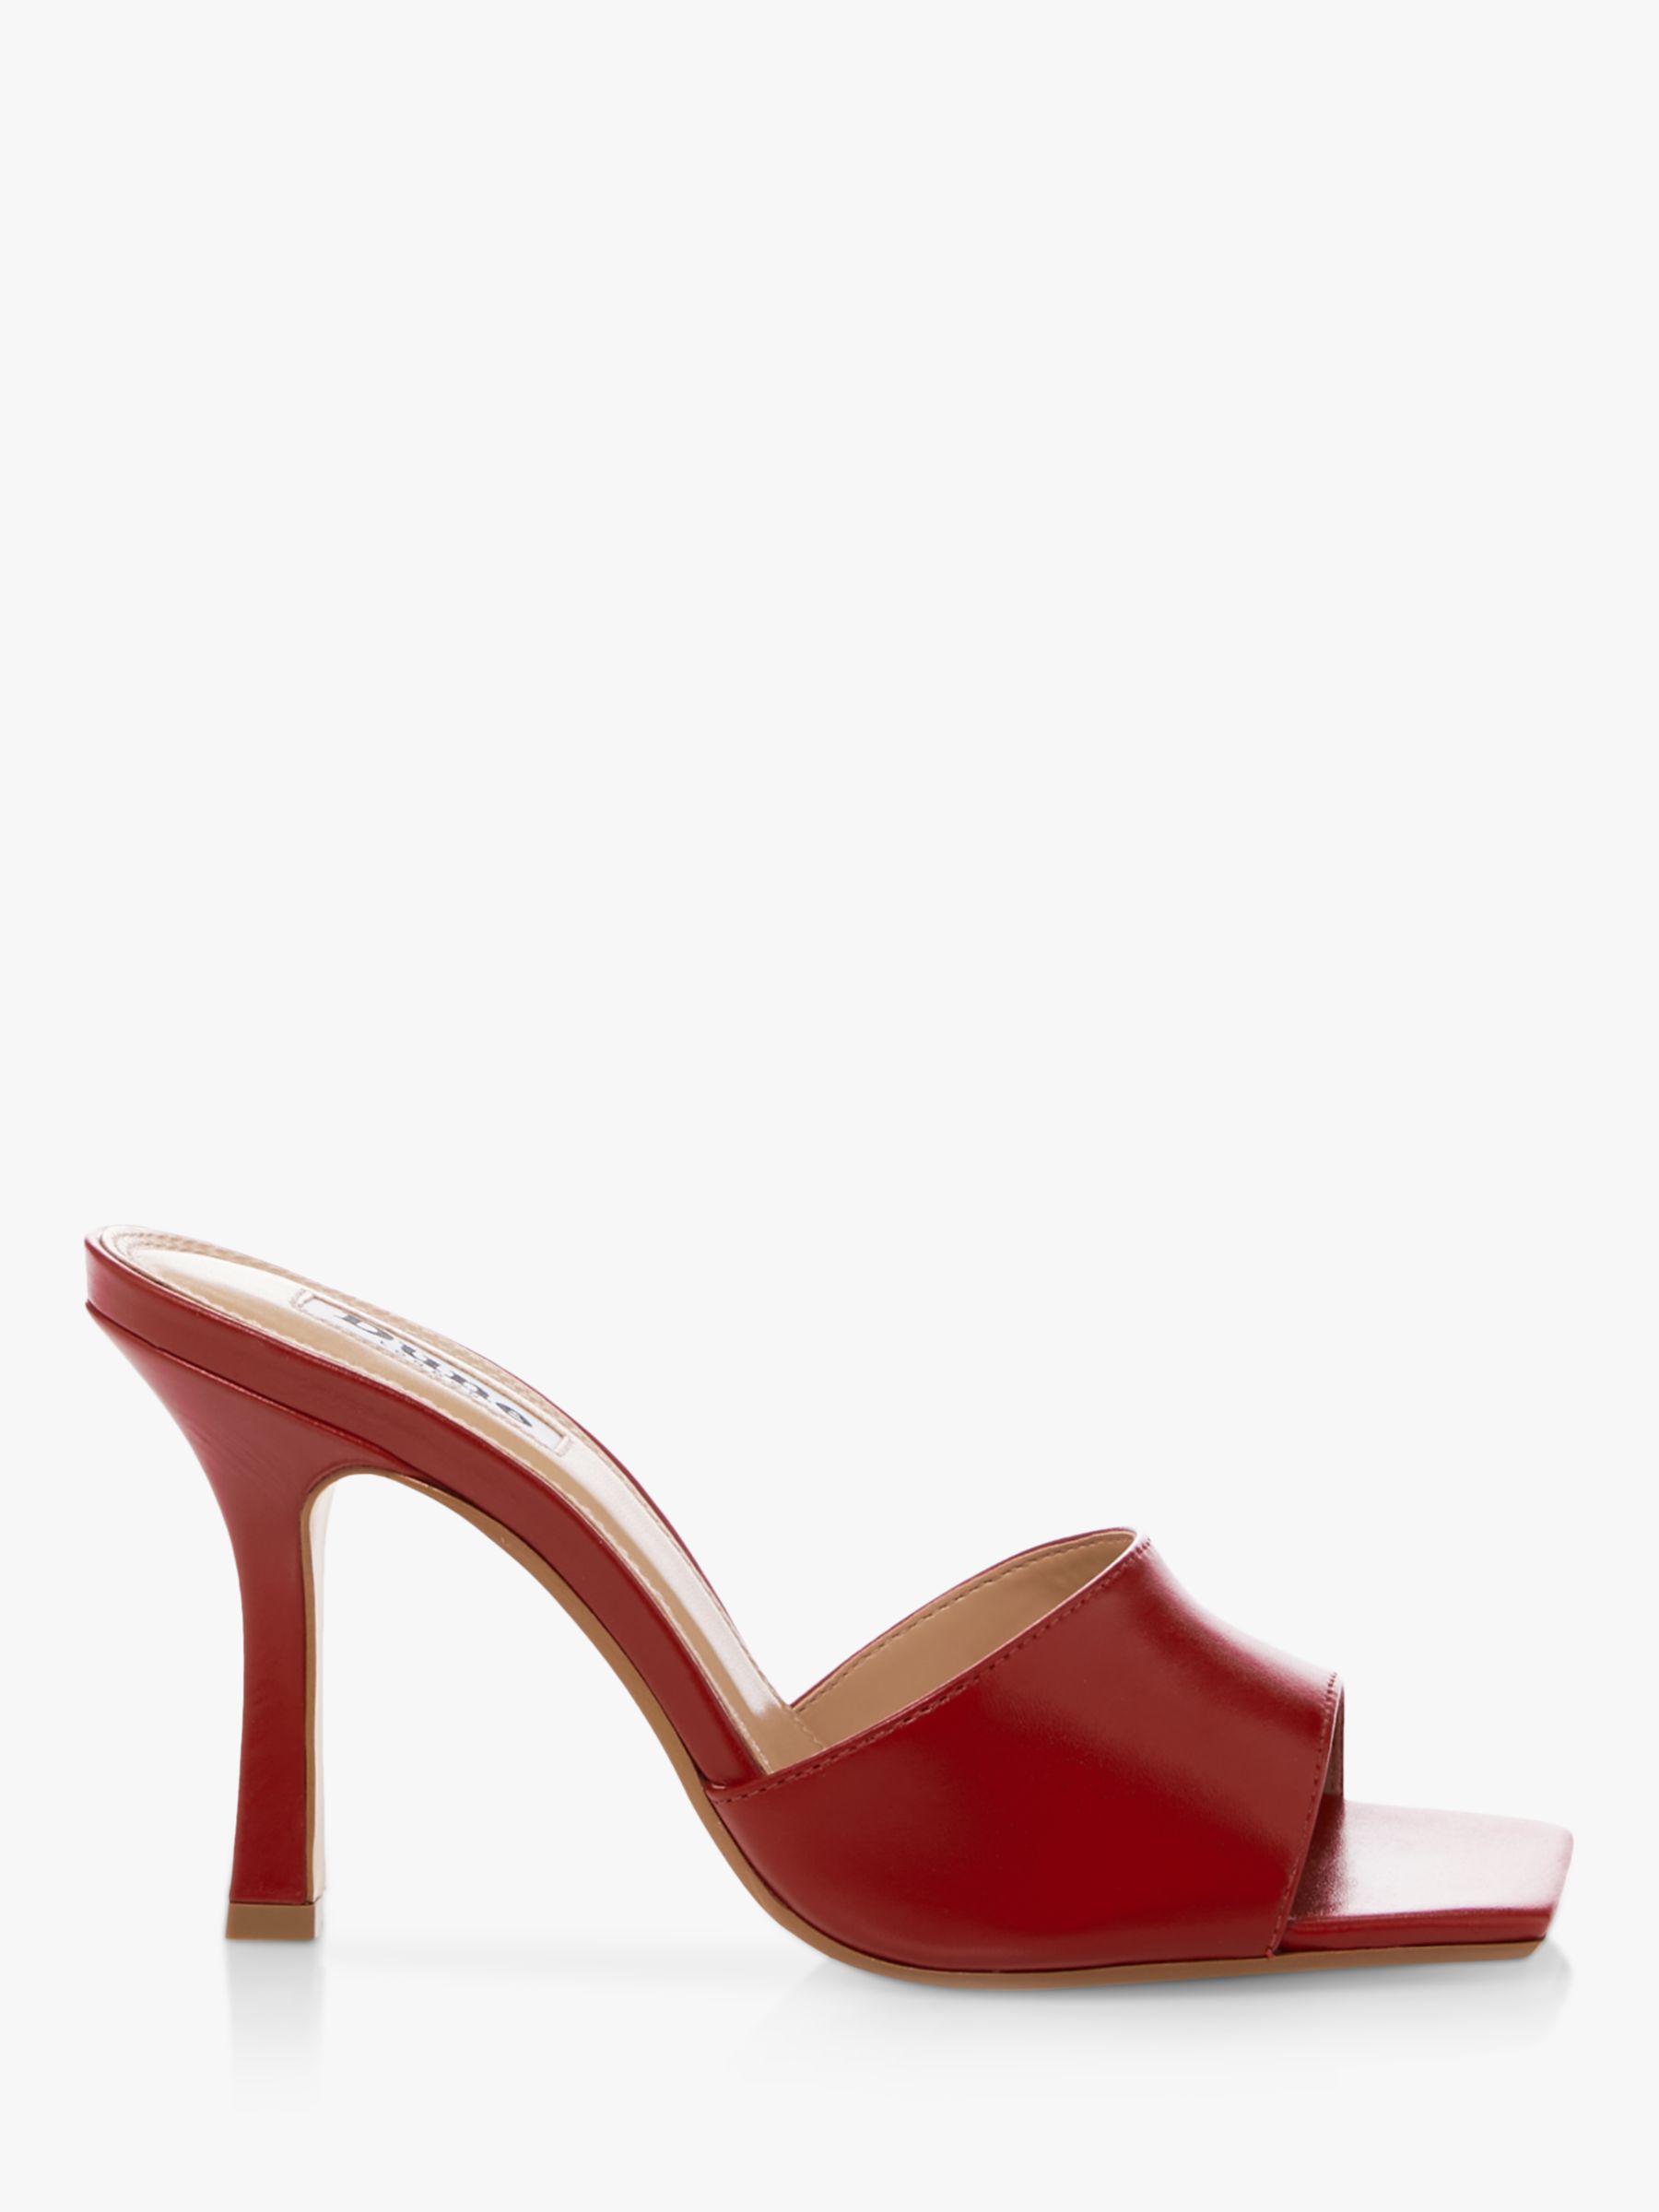 Dune Mantra Stiletto Heel Leather Mules, Red